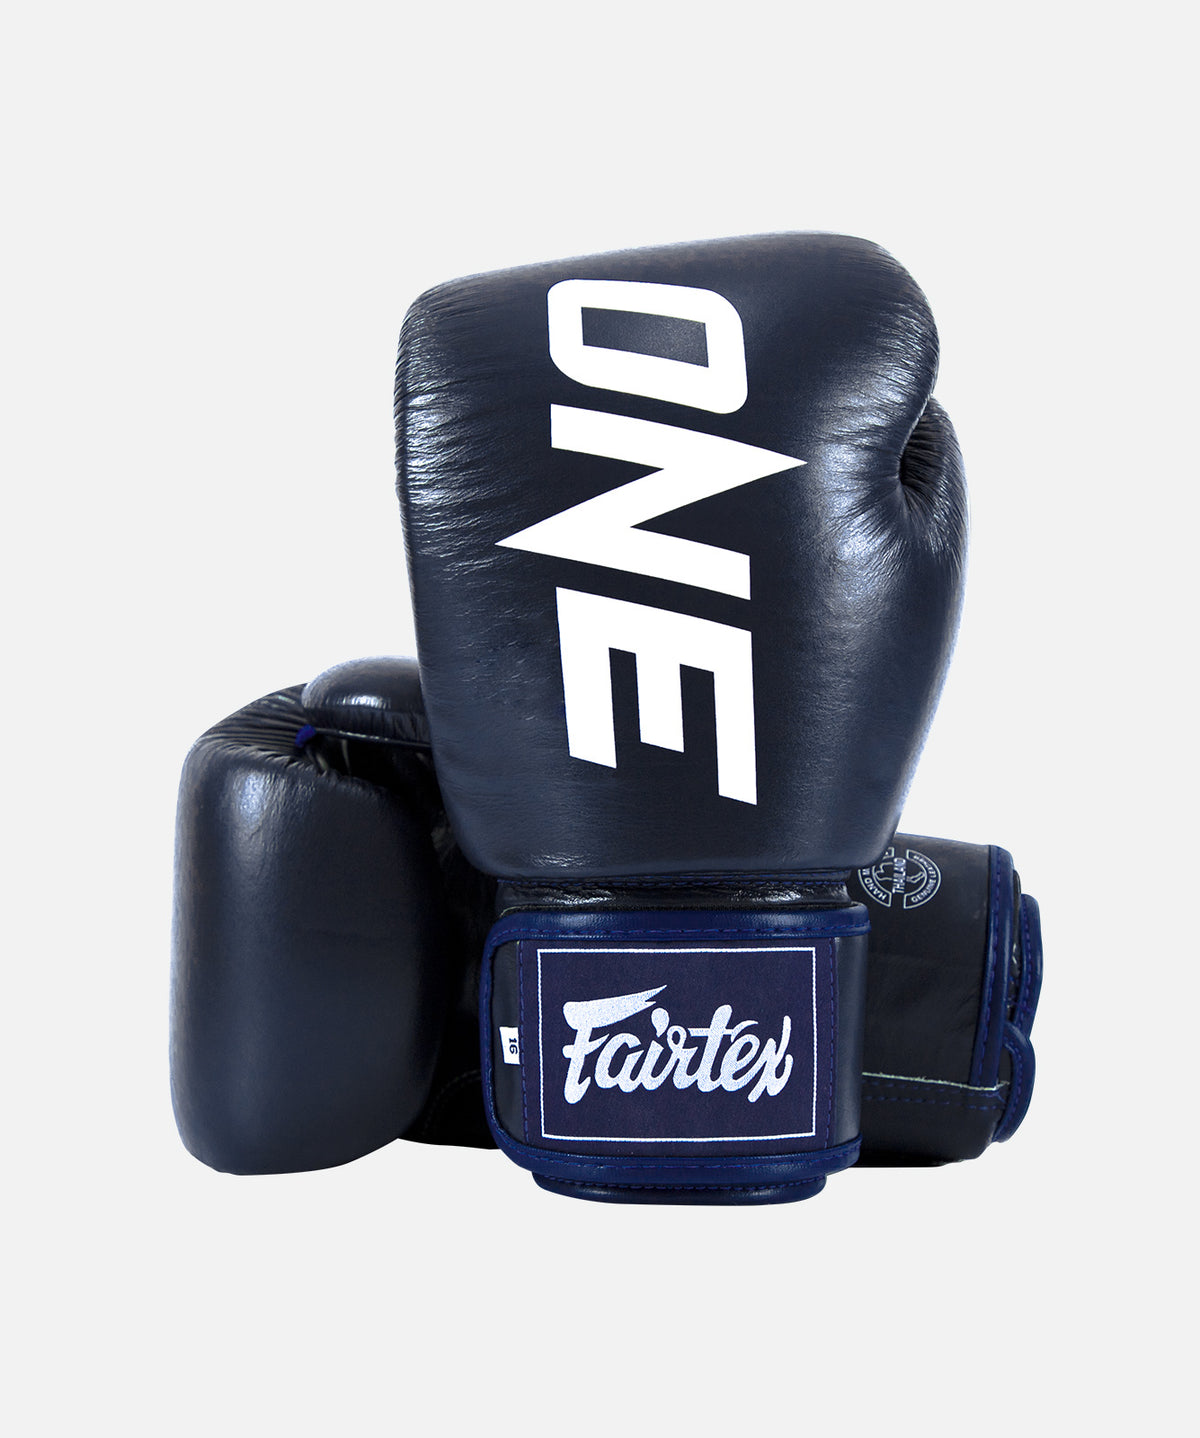 ONE x Fairtex Tight-Fit Boxing Glove (Blue) ONE Championship